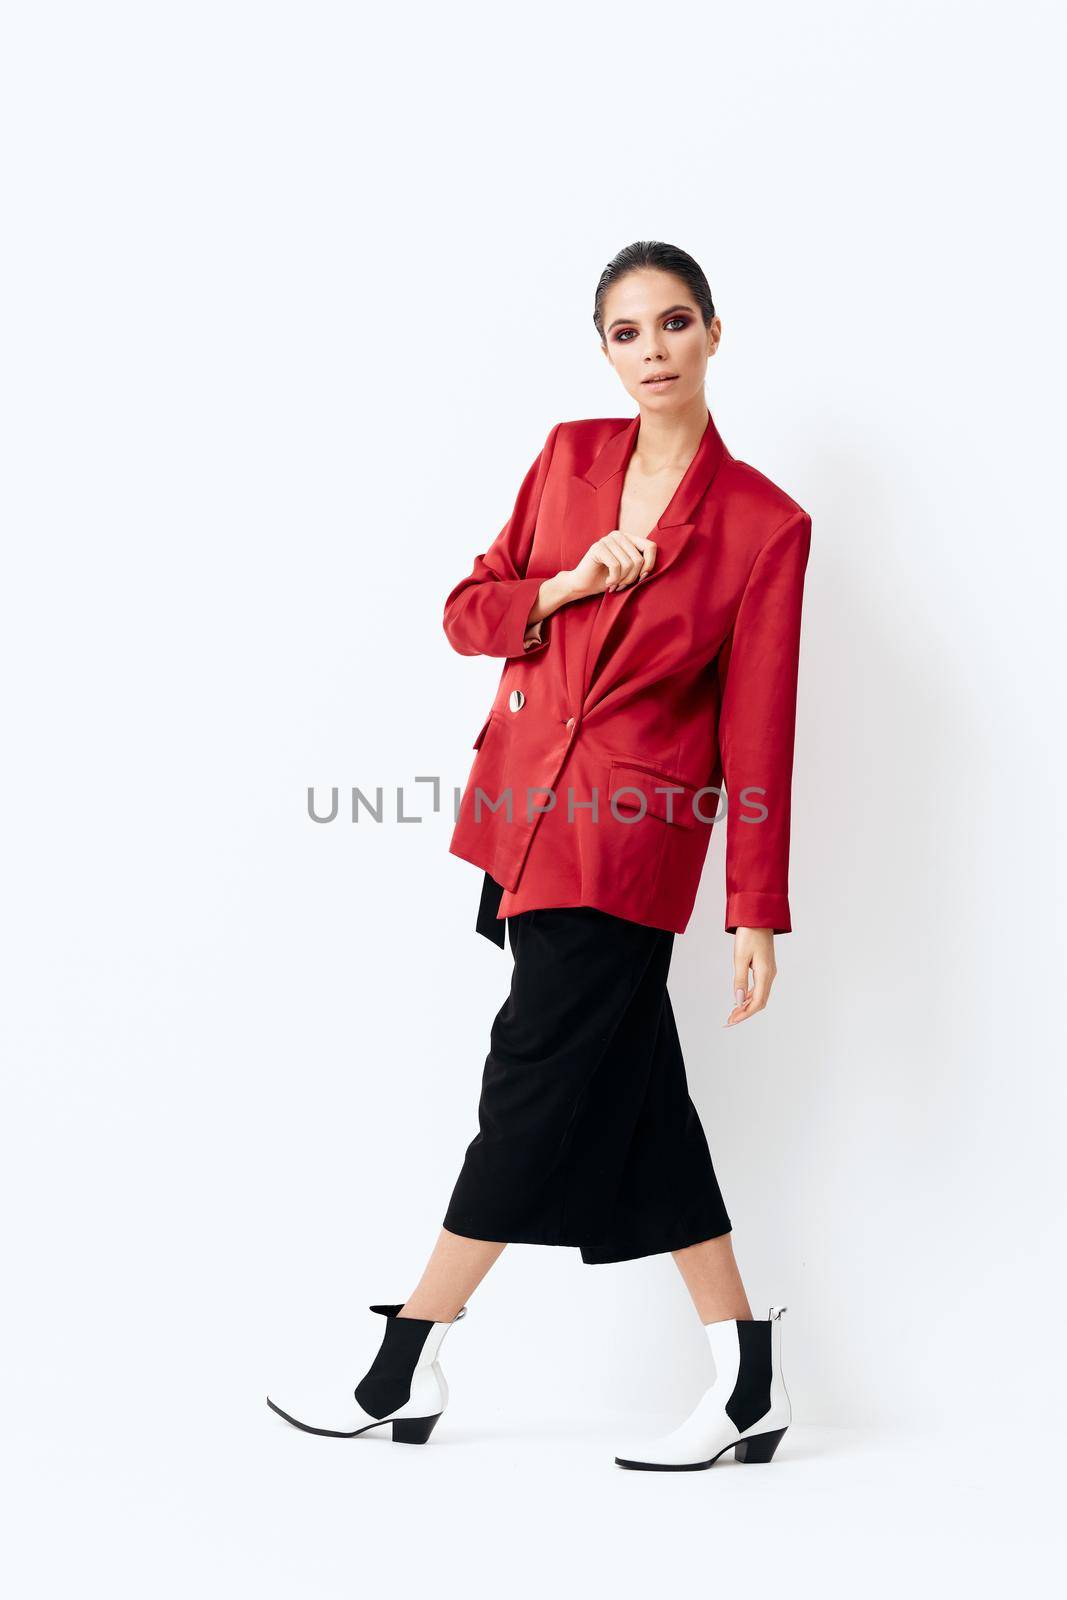 woman in red blazer fashion clothes glamor cosmetics by SHOTPRIME